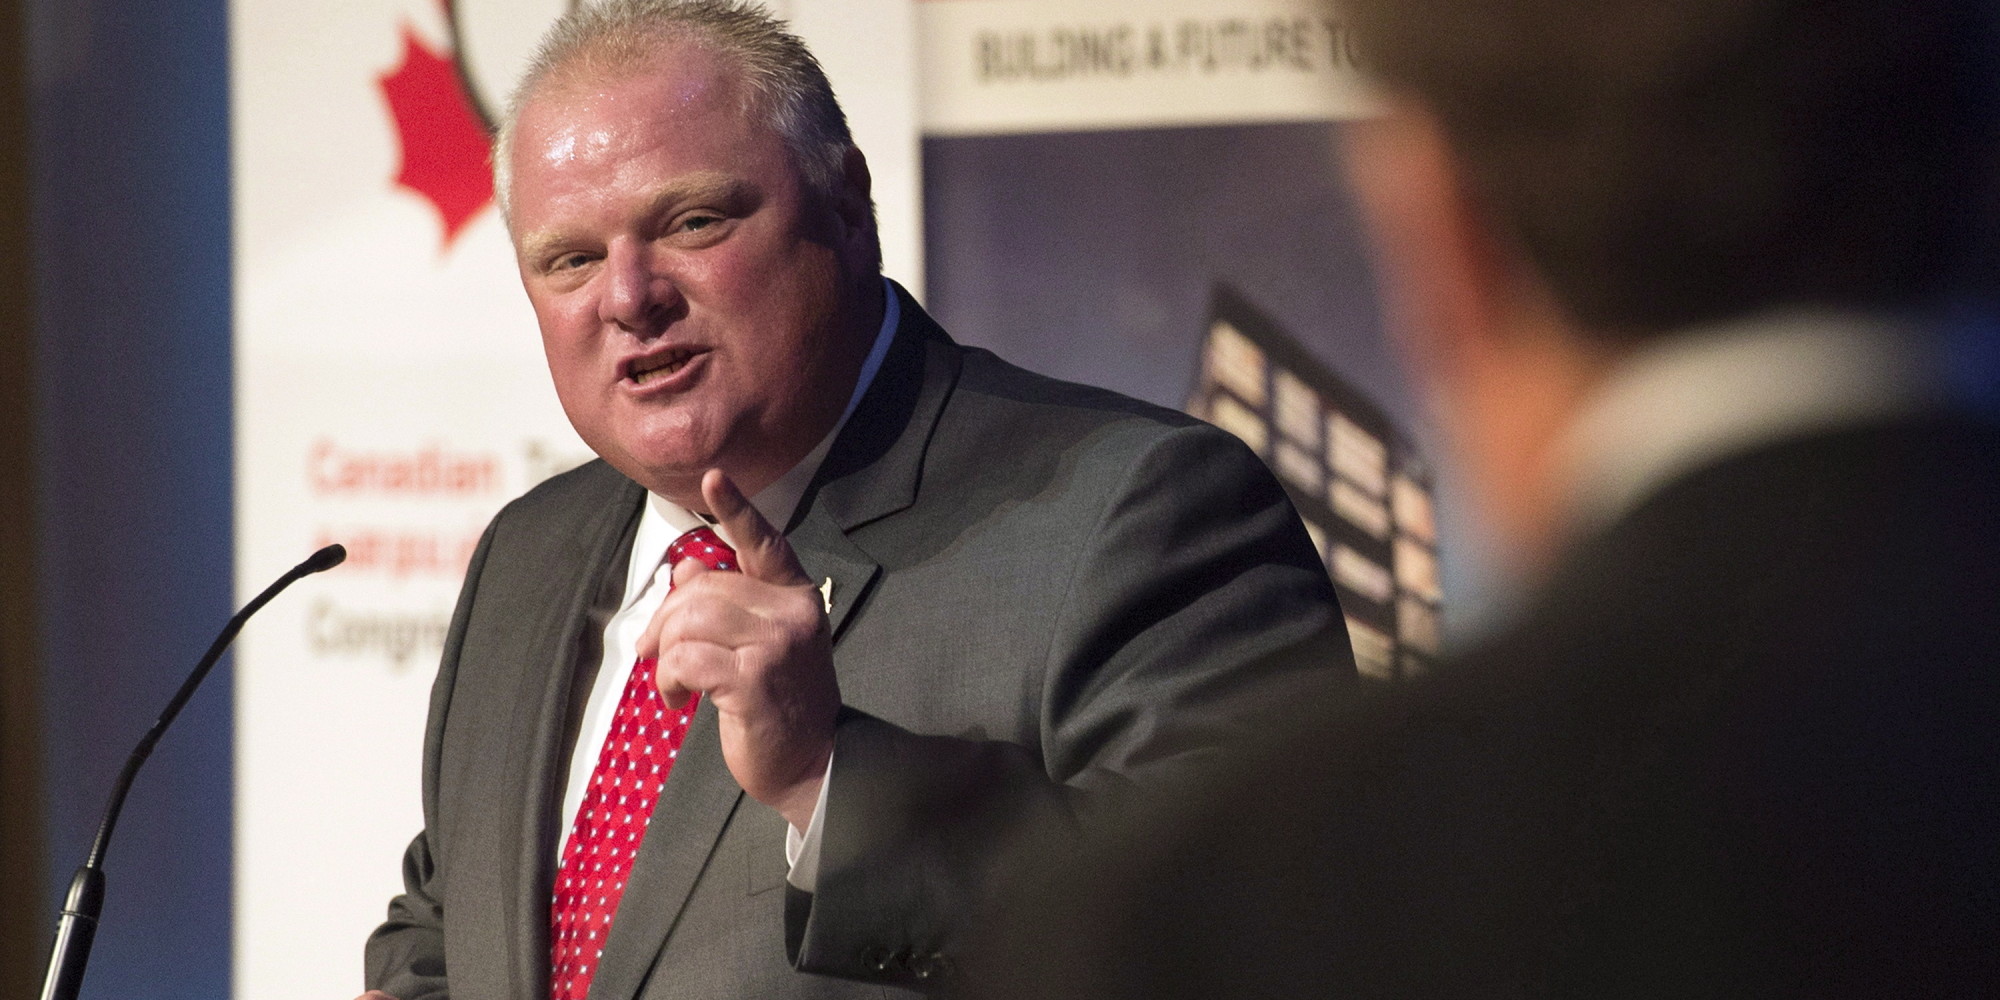 Rob ford and layoffs #7